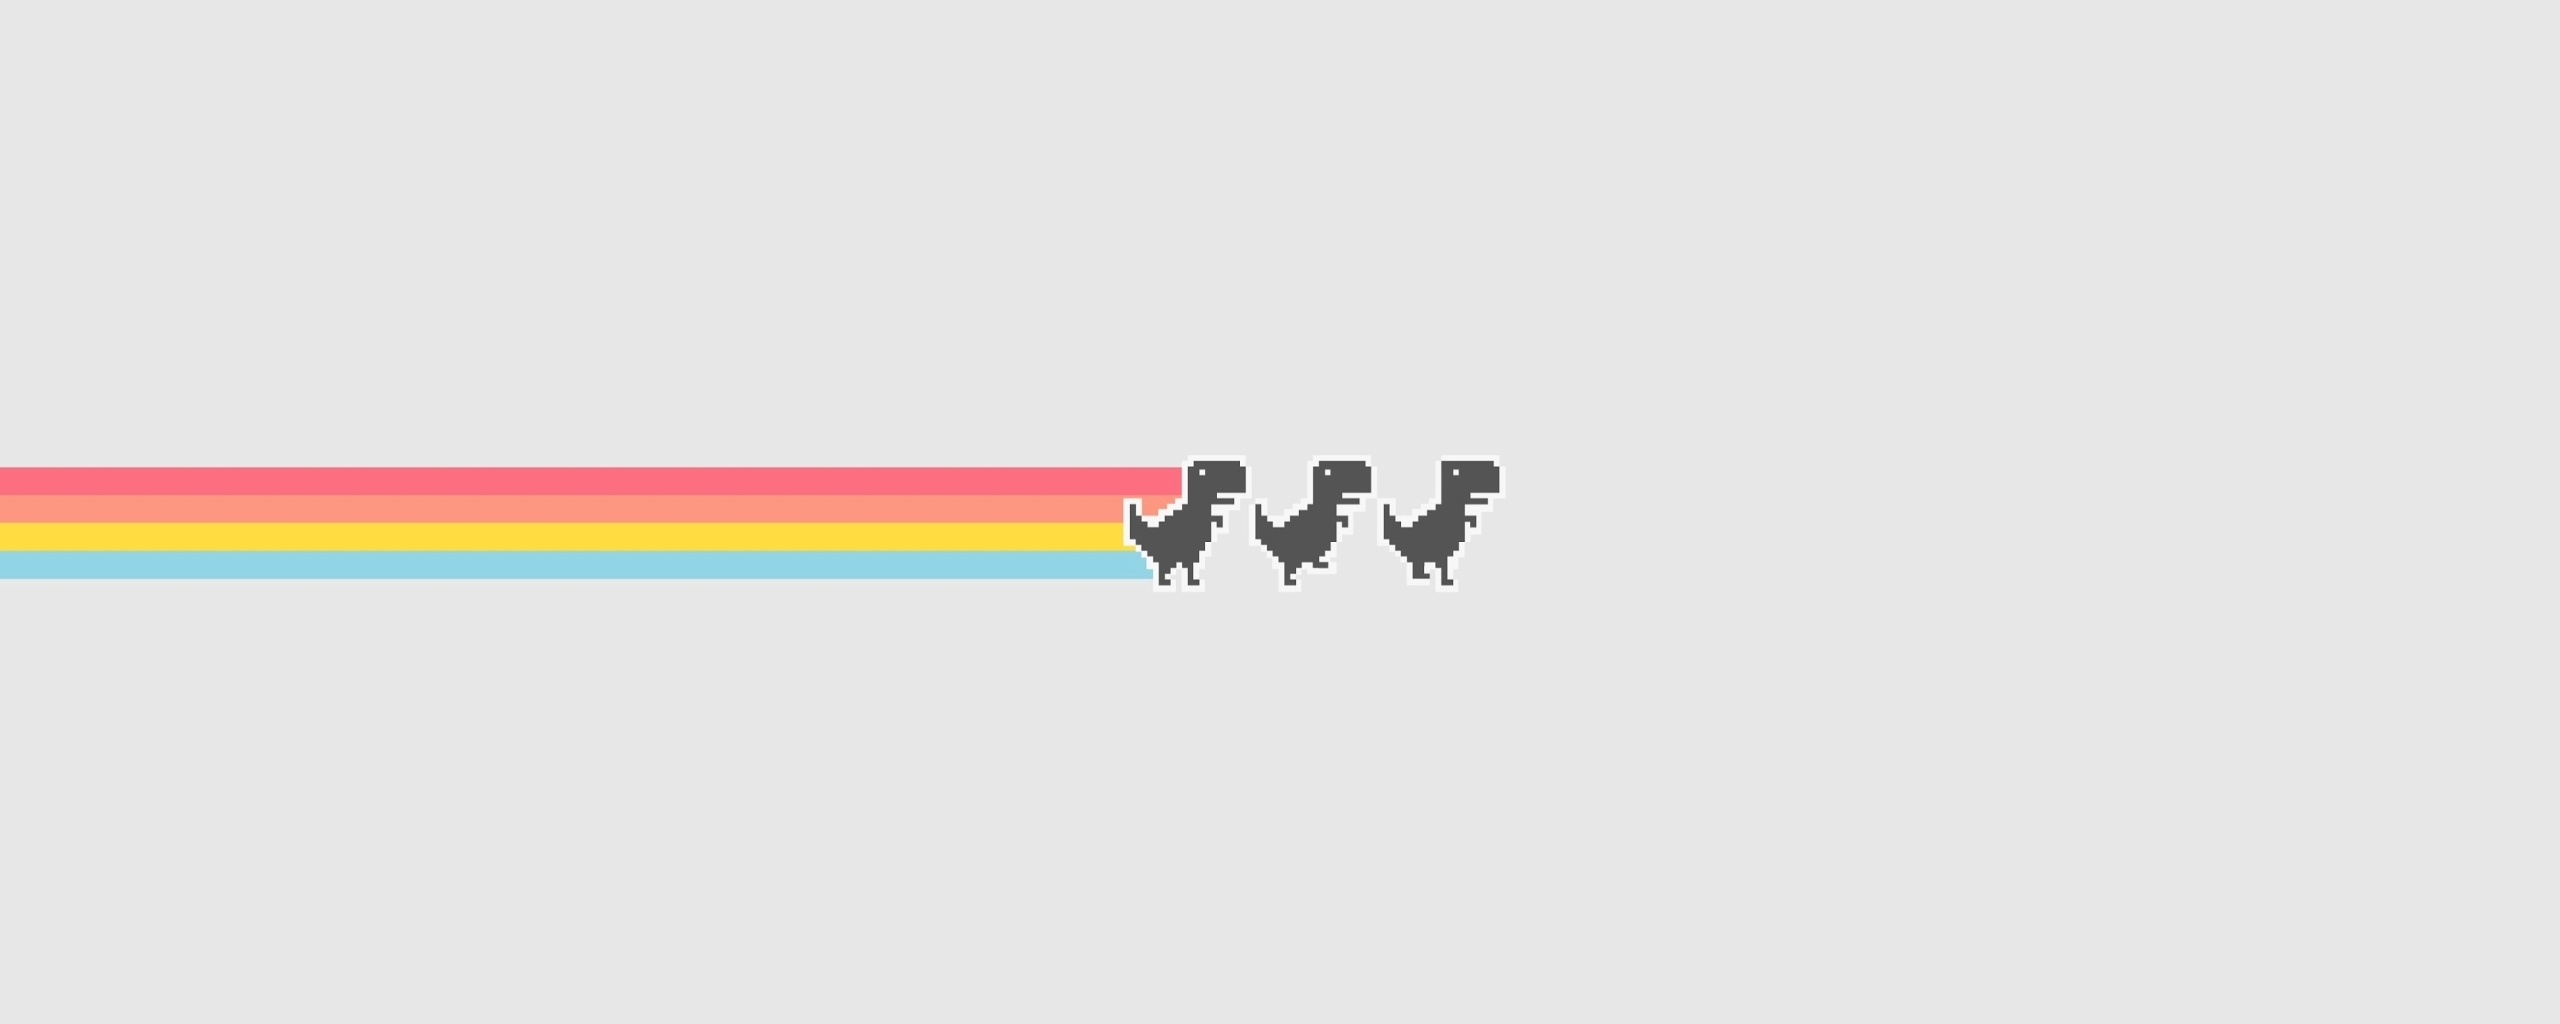 Download 2560x1024 wallpaper game, trex, the run, minimal, dual wide, wide 21: widescreen, 2560x1024 HD image, background, 21421